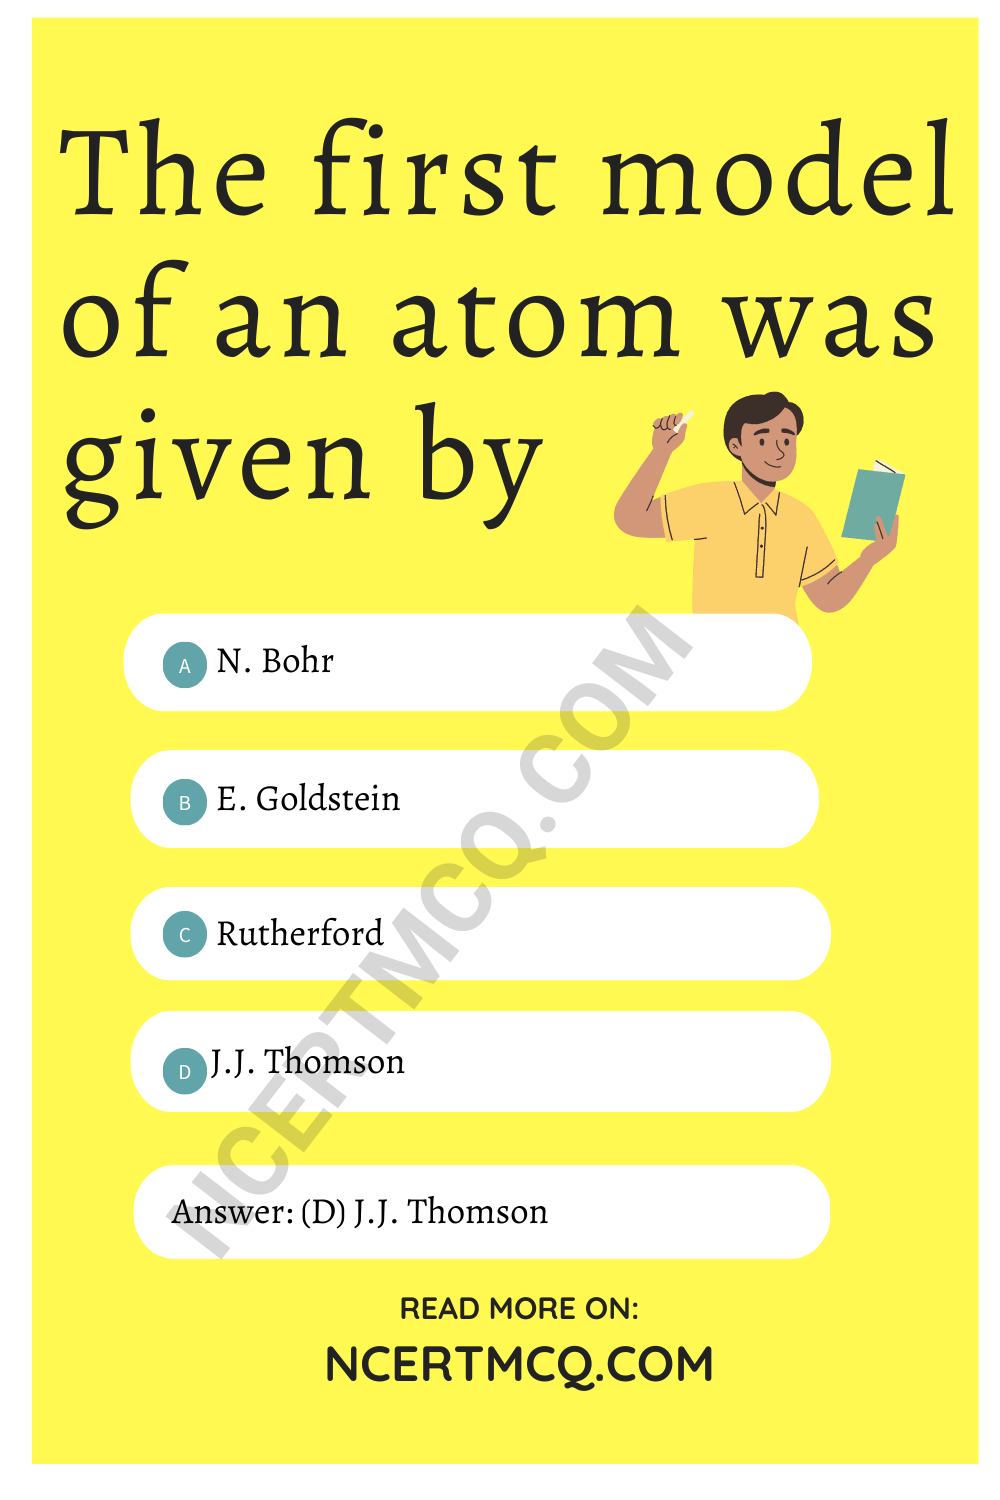 The first model of an atom was given by